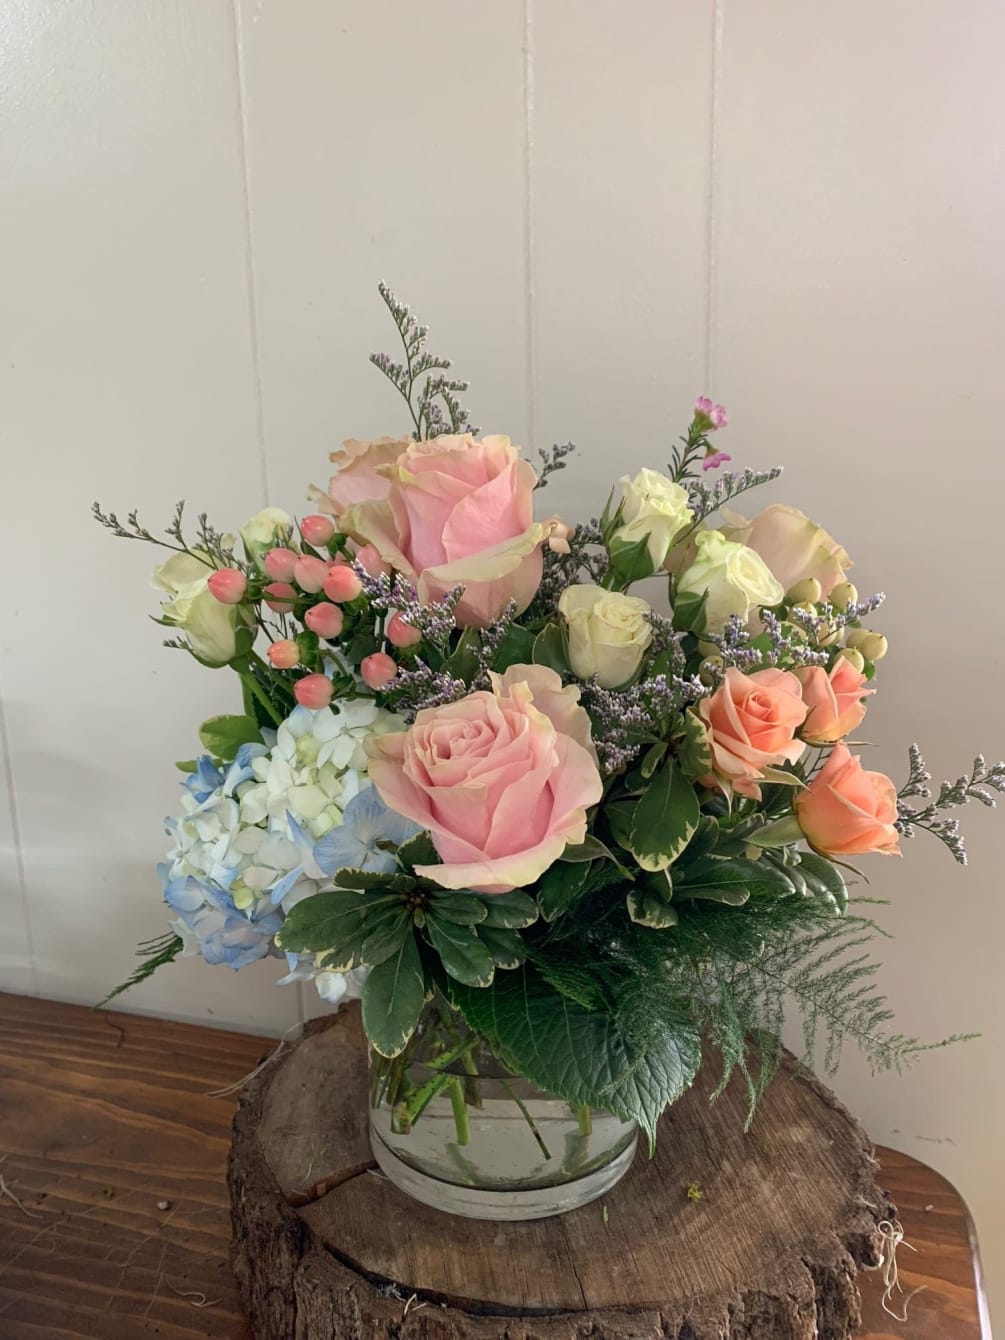 Pastel flowers make this arrangement perfect for those moments in life that